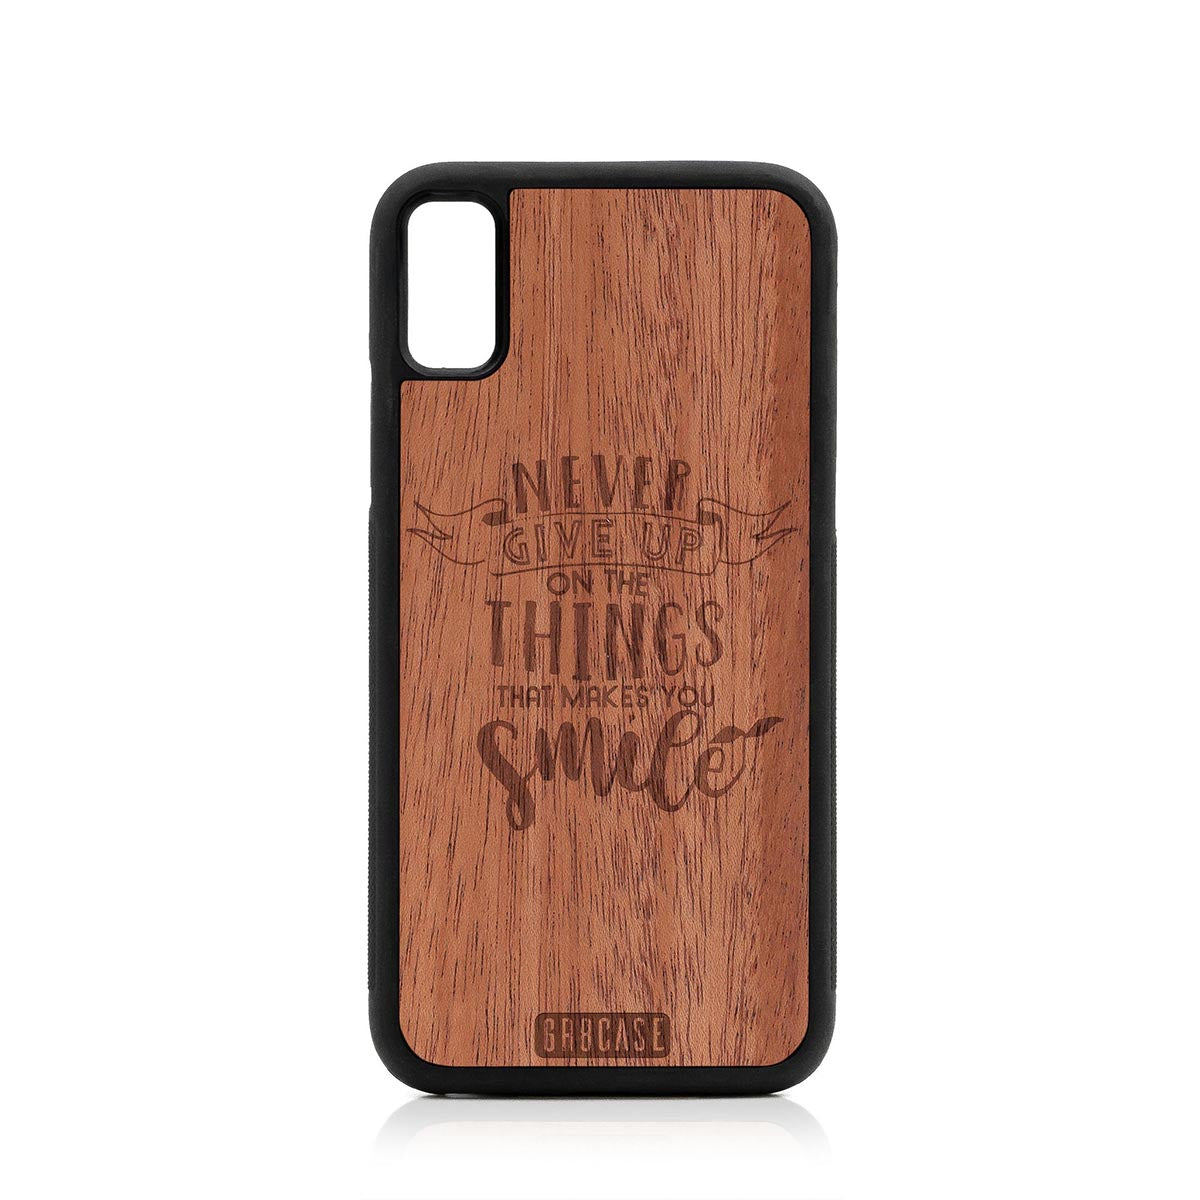 Never Give Up On The Things That Makes You Smile Design Wood Case For iPhone XR by GR8CASE